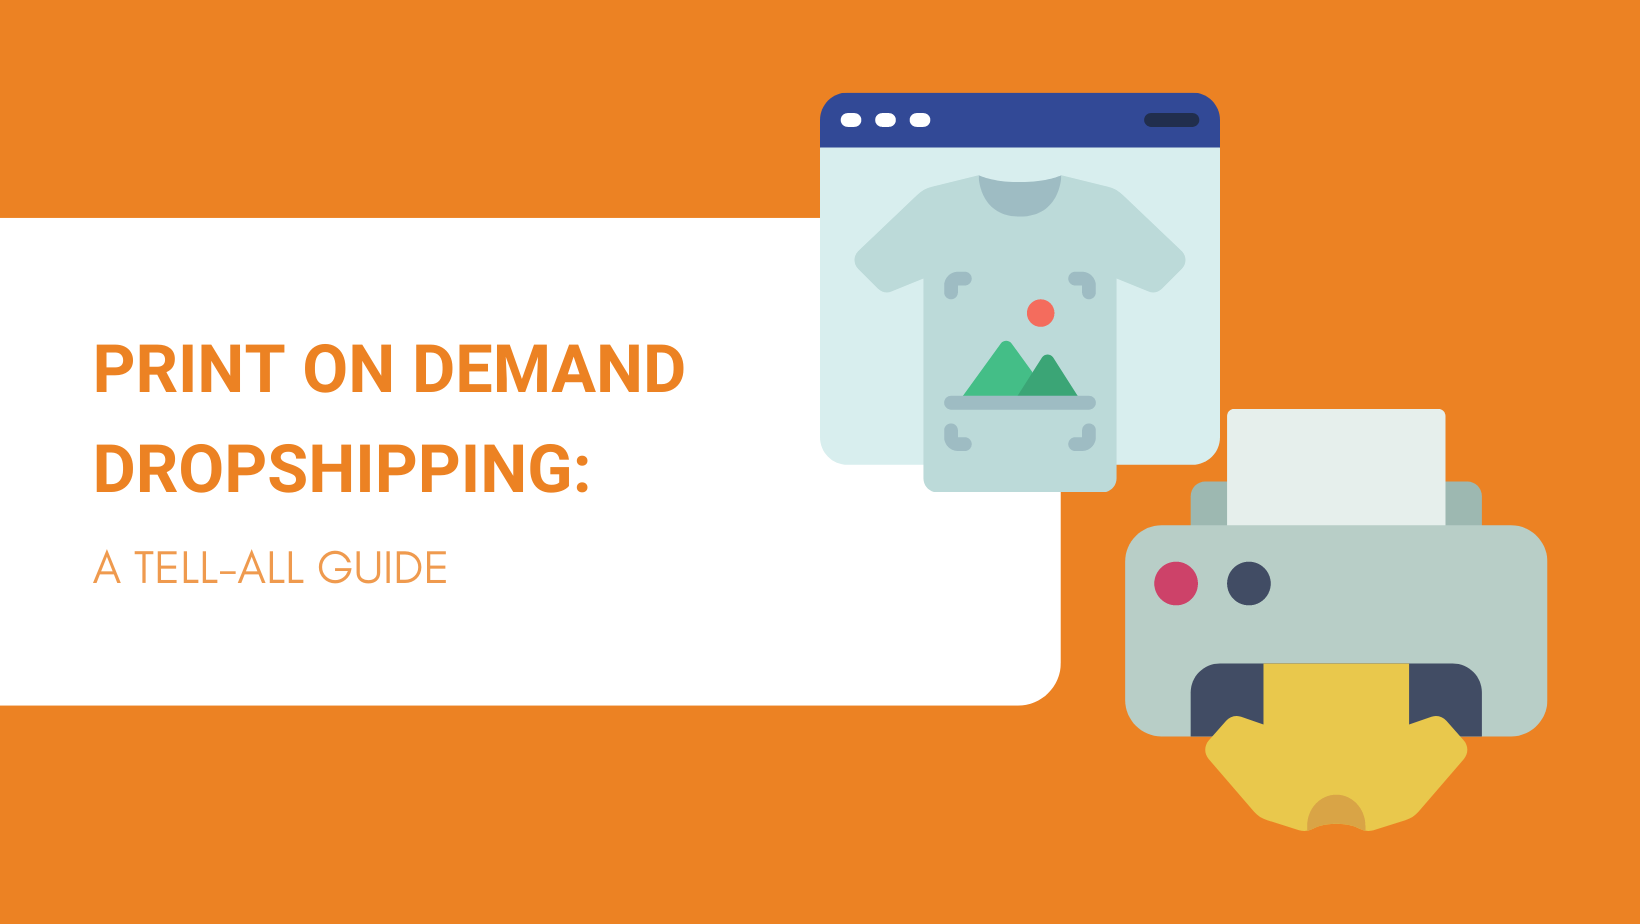 PRINT ON DEMAND DROPSHIPPING A TELL-ALL GUIDE